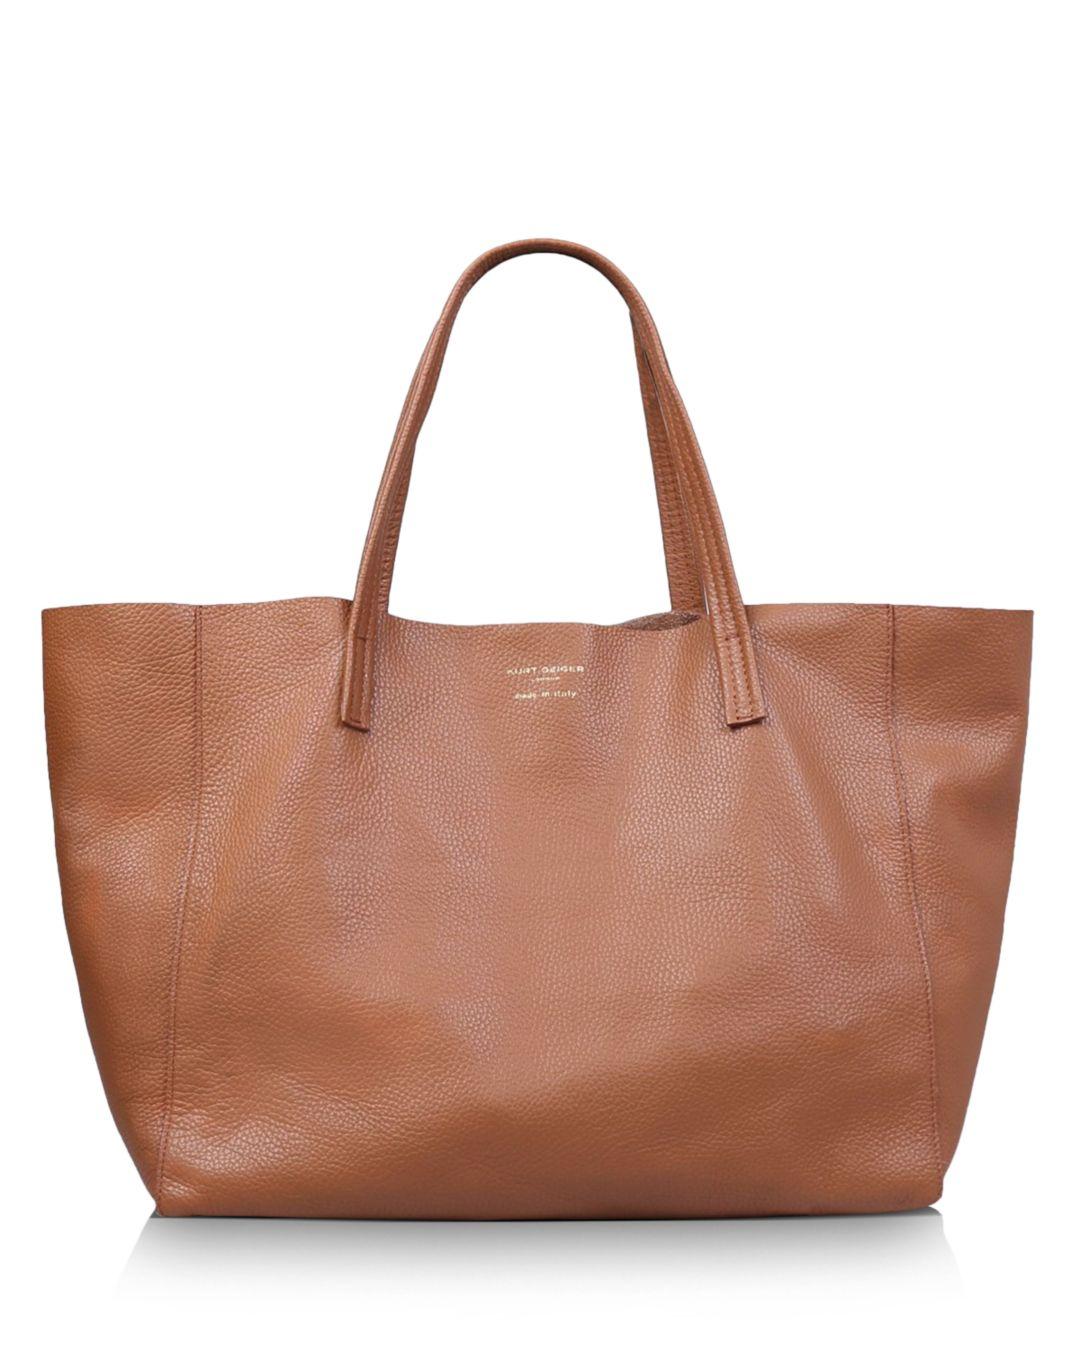 Kurt Geiger Violet Extra Large Horizontal Leather Tote in Tan (Brown ...